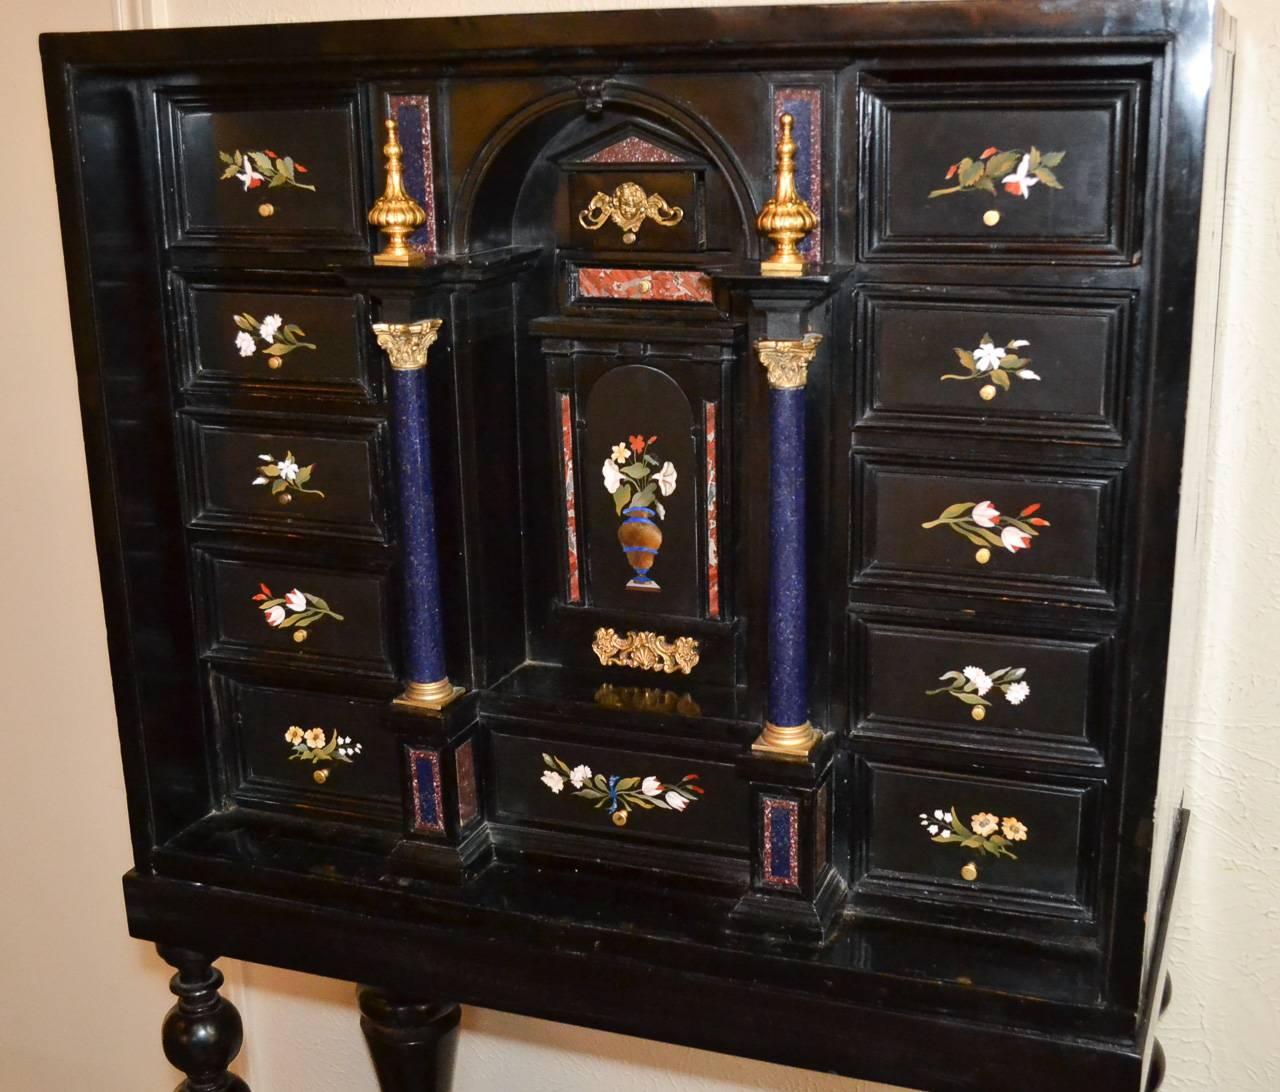 Marvelous 19th century Continental pietra dura inlaid bargueno, circa 1880. Having colorful pietra dura inlays across fitted drawers in floral motif, lovely aged black lacquered finish, and resting on later Spanish base (circa 1980). A splendid